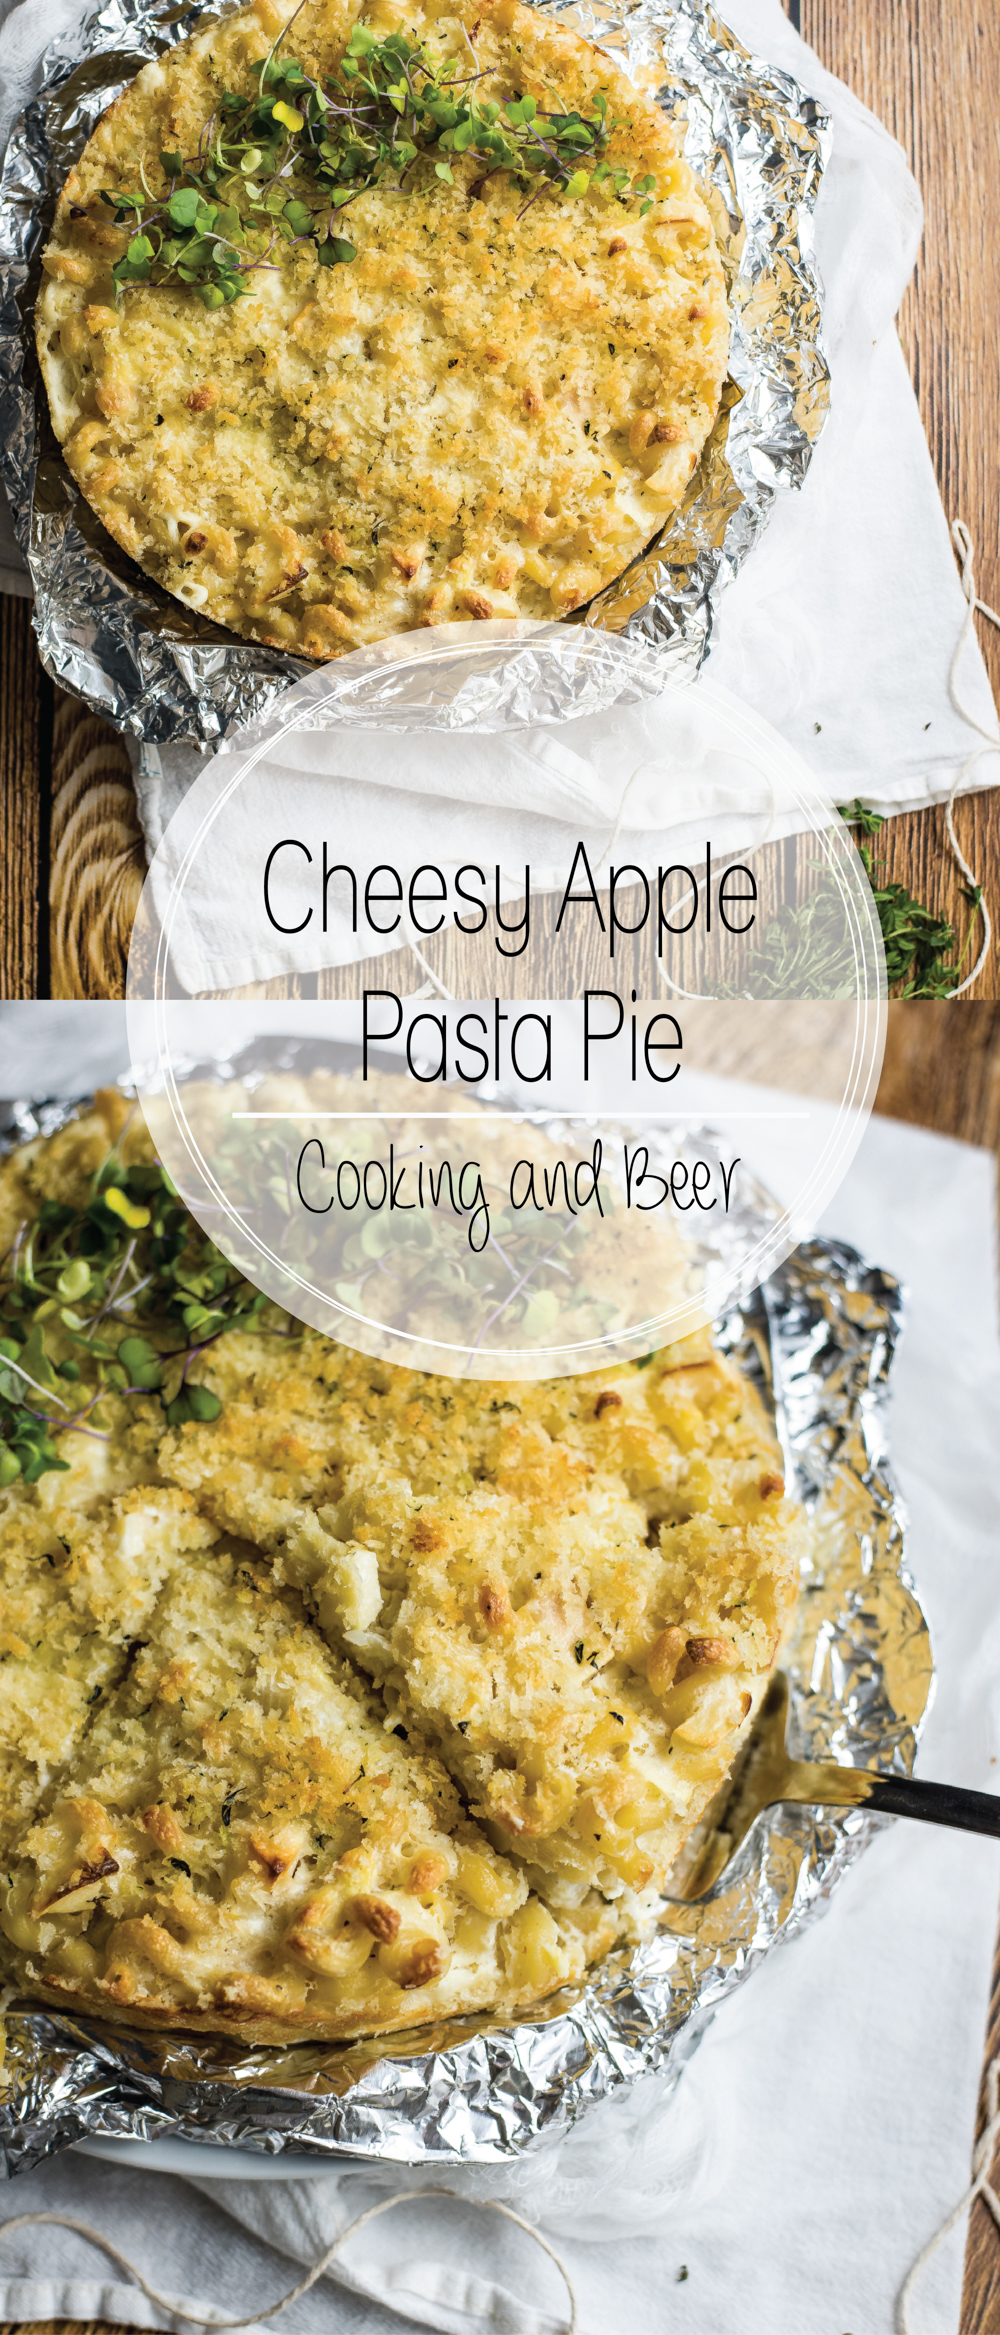 Cheesy apple pasta pie is a vegetarian, family-friendly, weeknight meal. It is exploding with fall flavors and cheesy goodness!